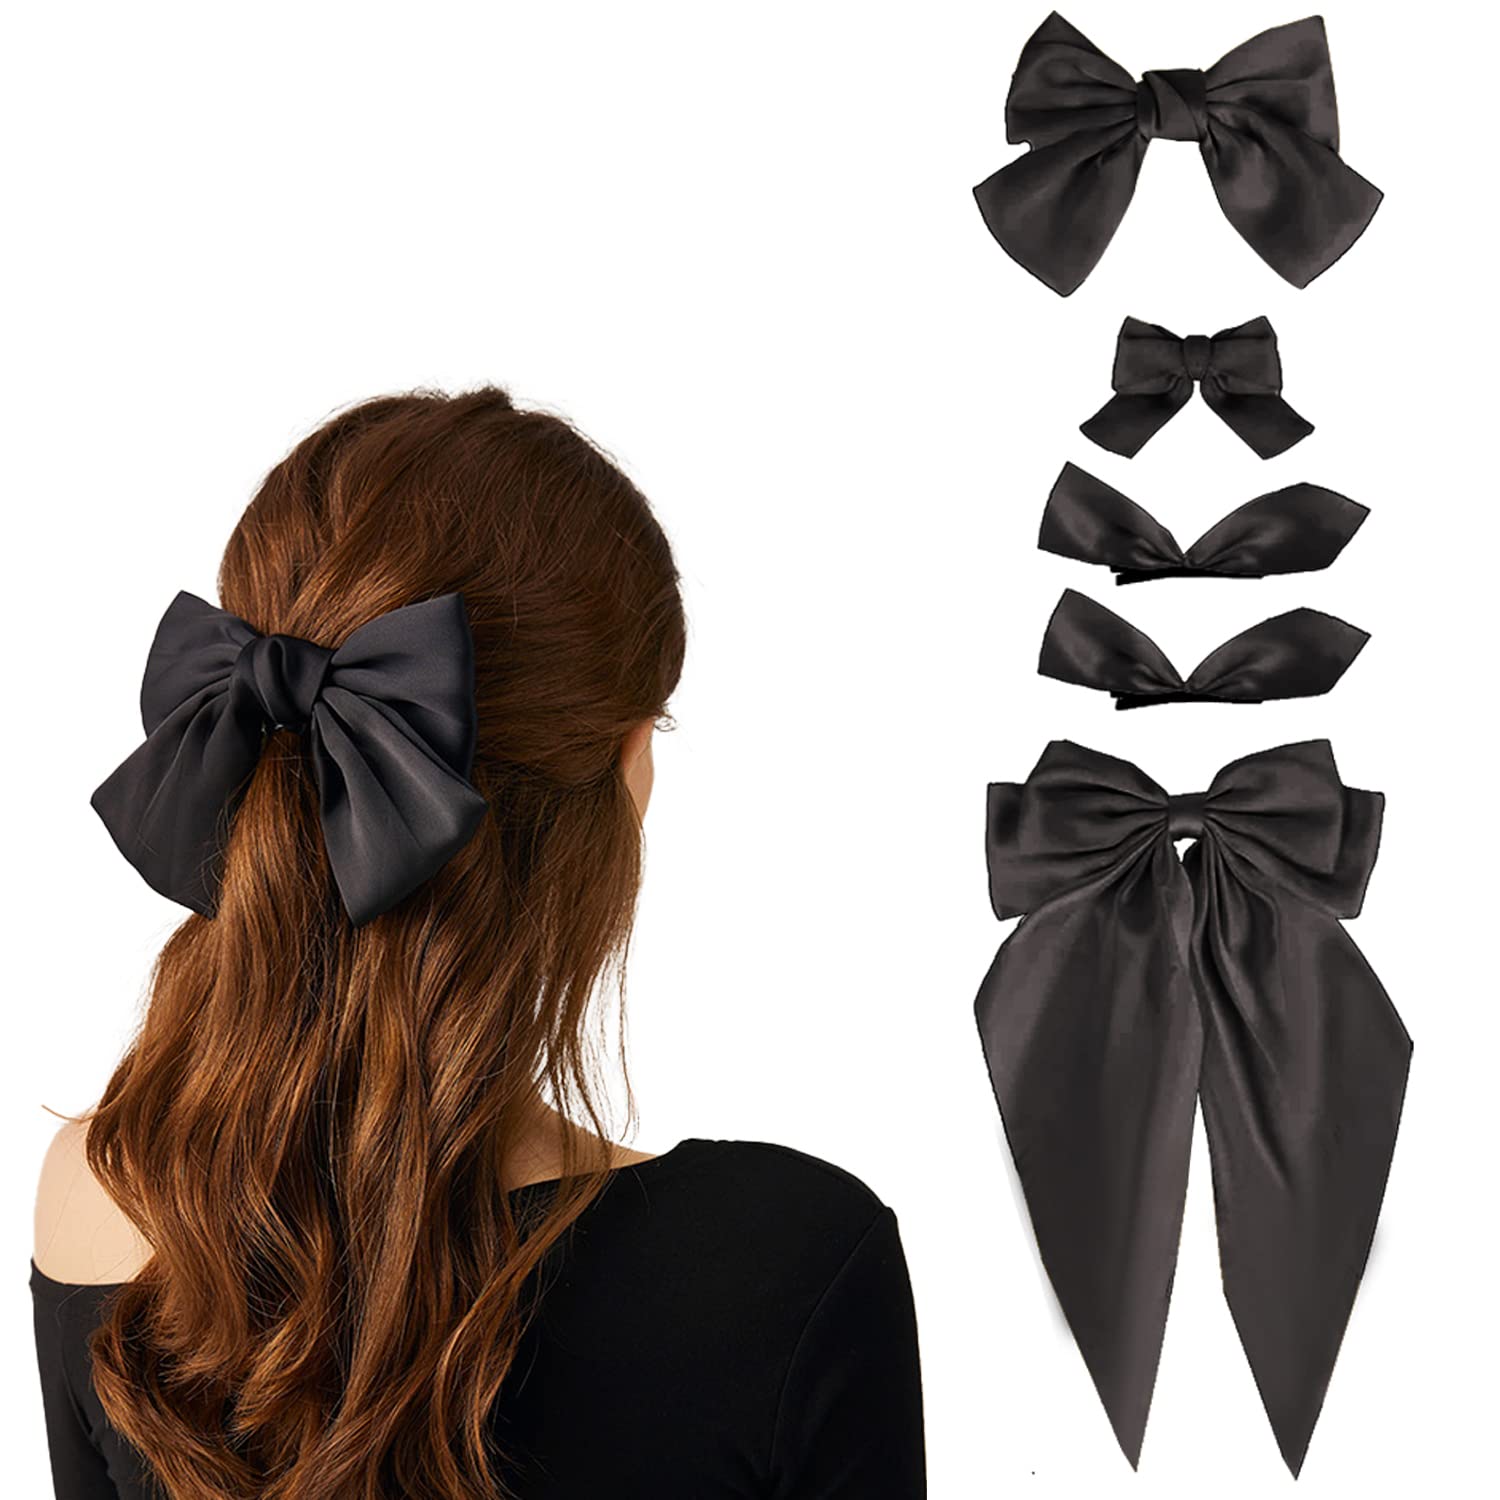 Trendy and Stylish Bow Tie Hairstyles for a Unique Look